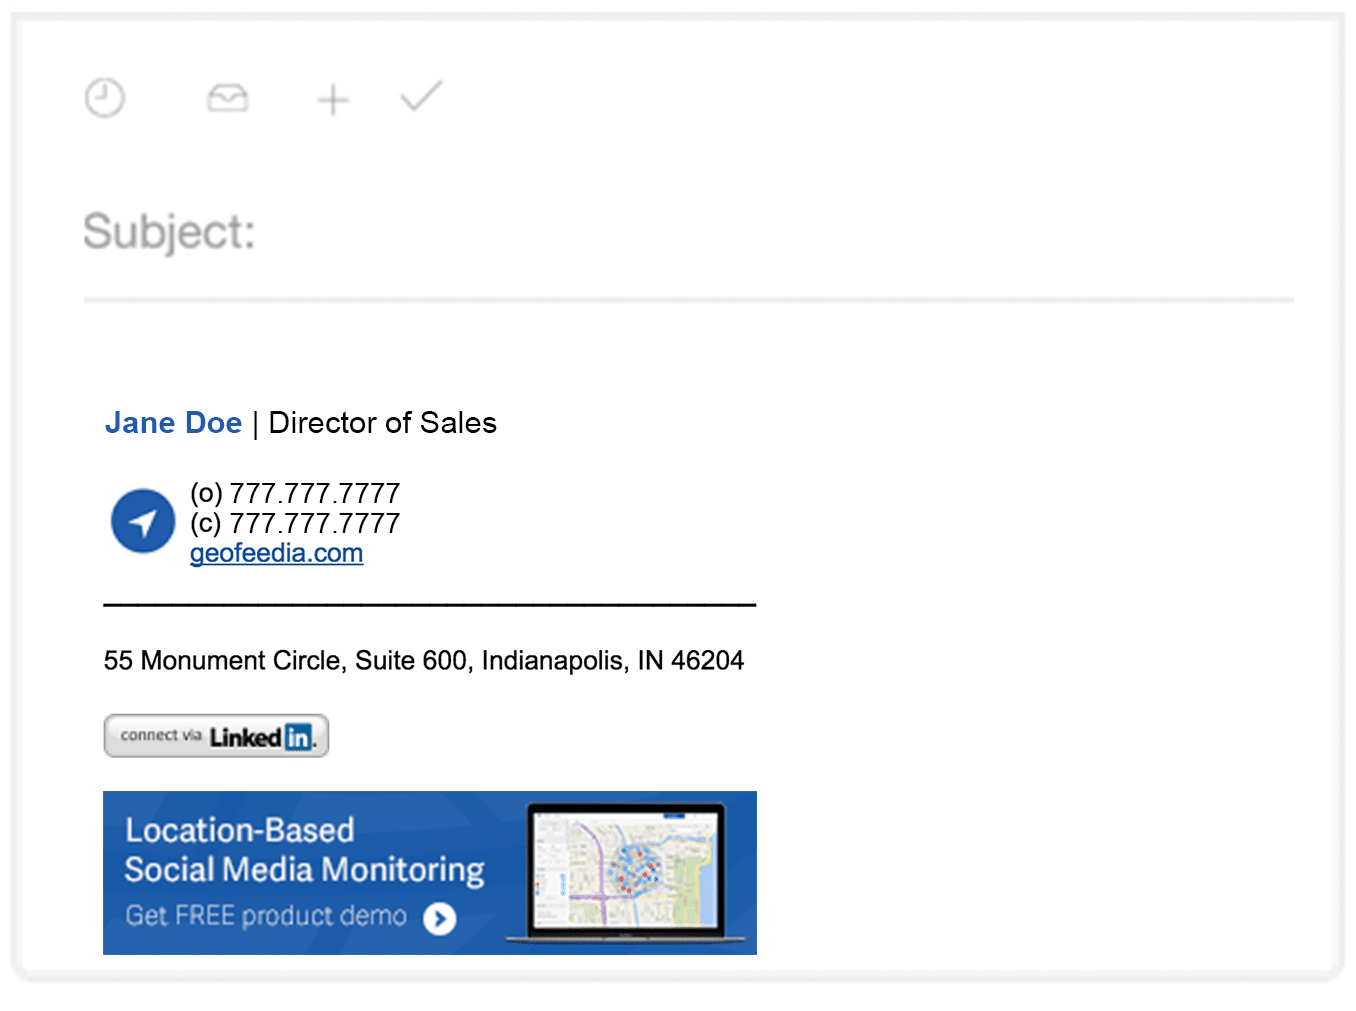 Great email signatures from Geofeedia using Sigstr